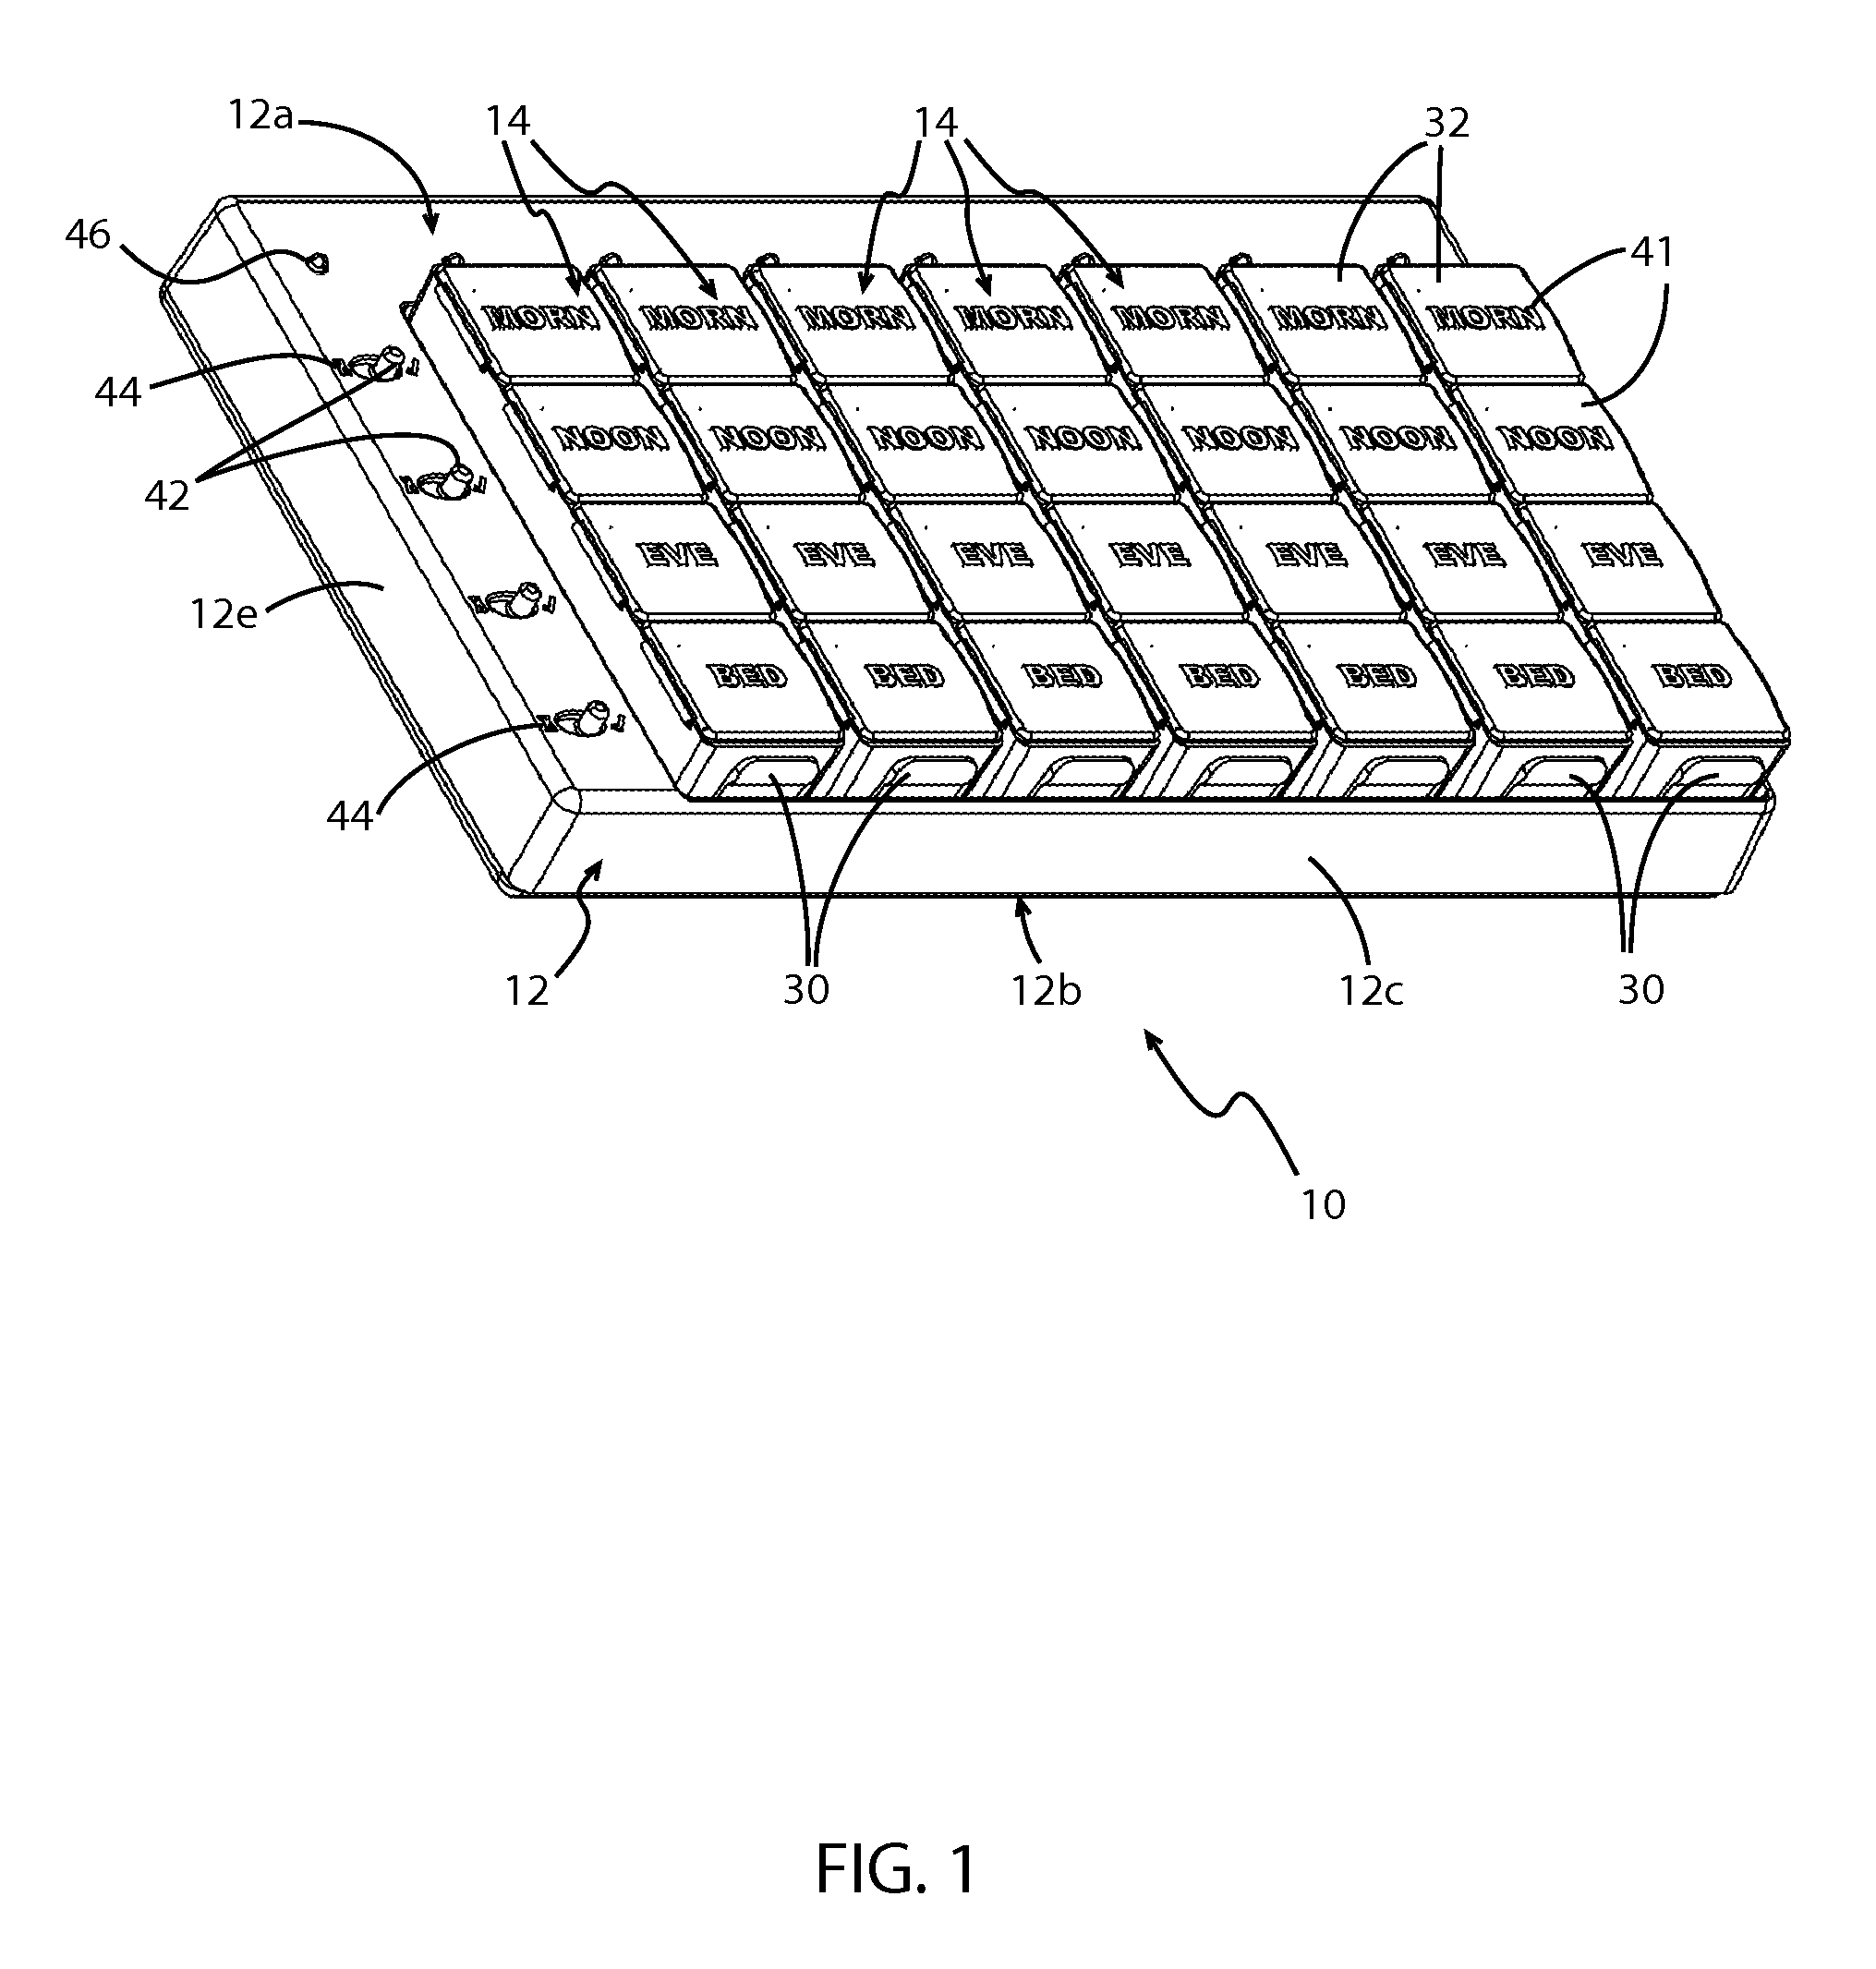 Method of using a medication reminder and compliance system including an electronic pill box